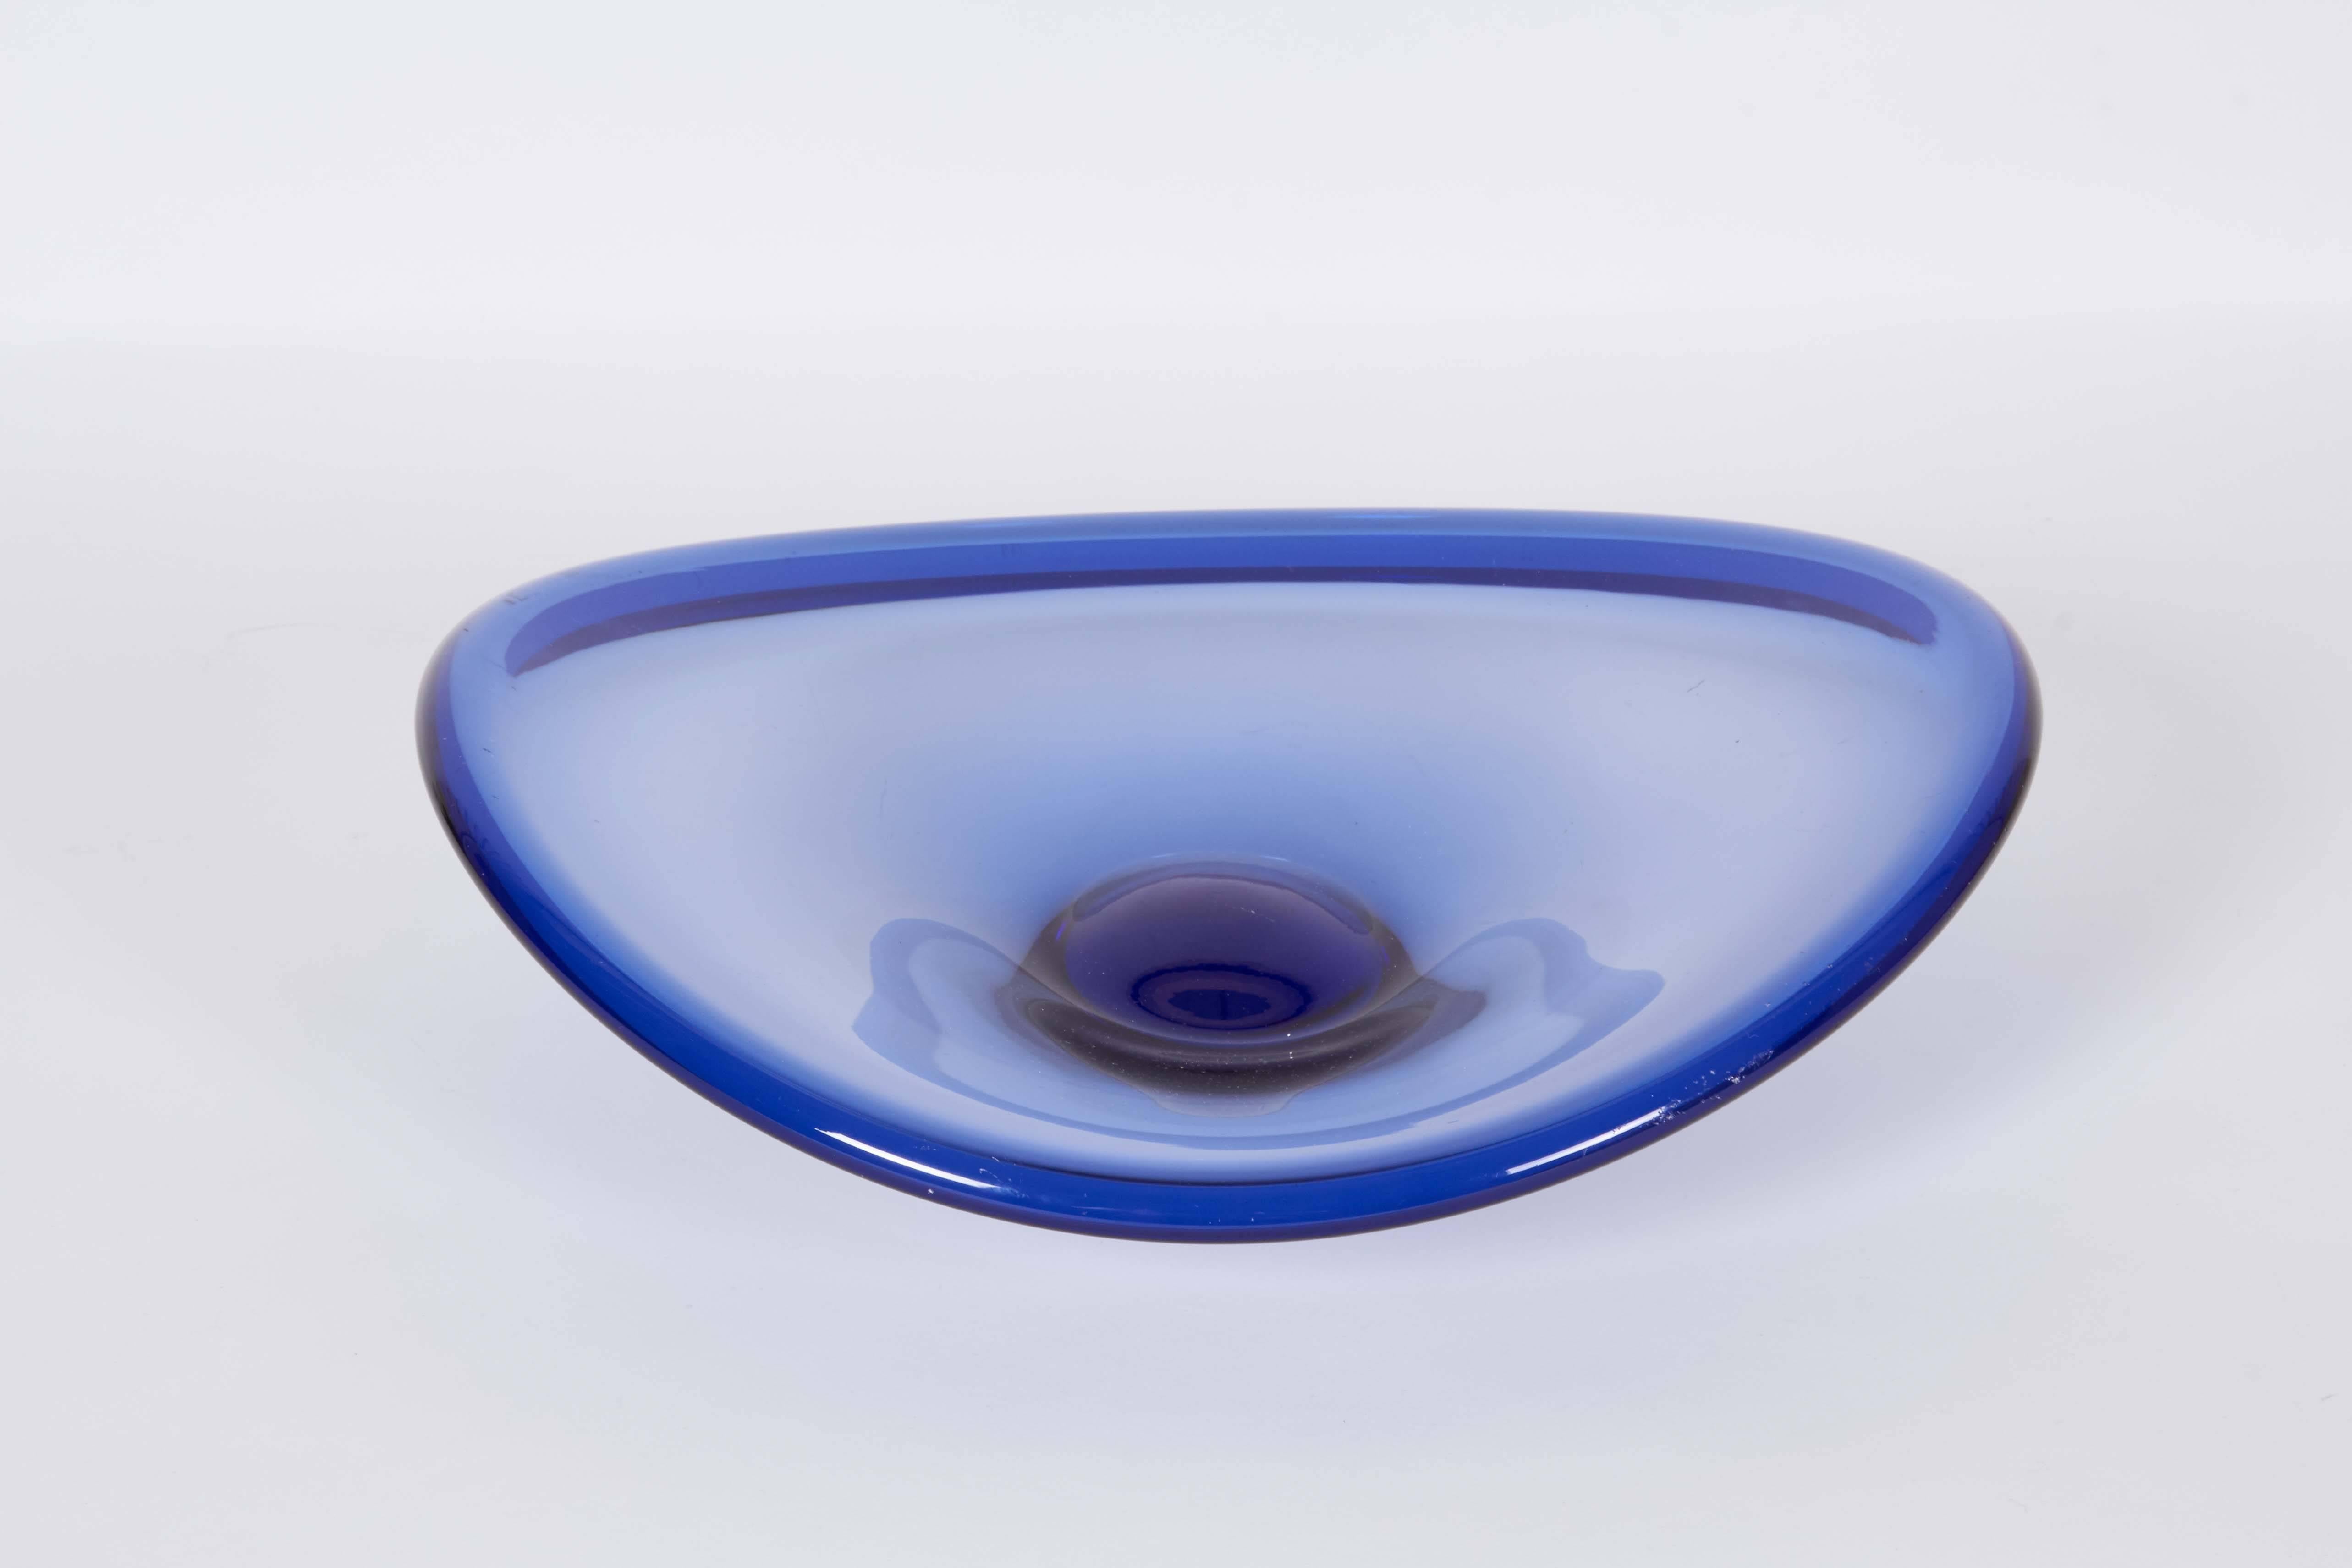 A Scandinavian Modern blown glass 'Selandia' dish, designed by Per Lutken for Holmgaard, produced circa 1950s-1960s, in cobalt blue with abstract curved rim and convex center. Markings include [Holmgaard], Lütken's signature, numbered [14595] to the